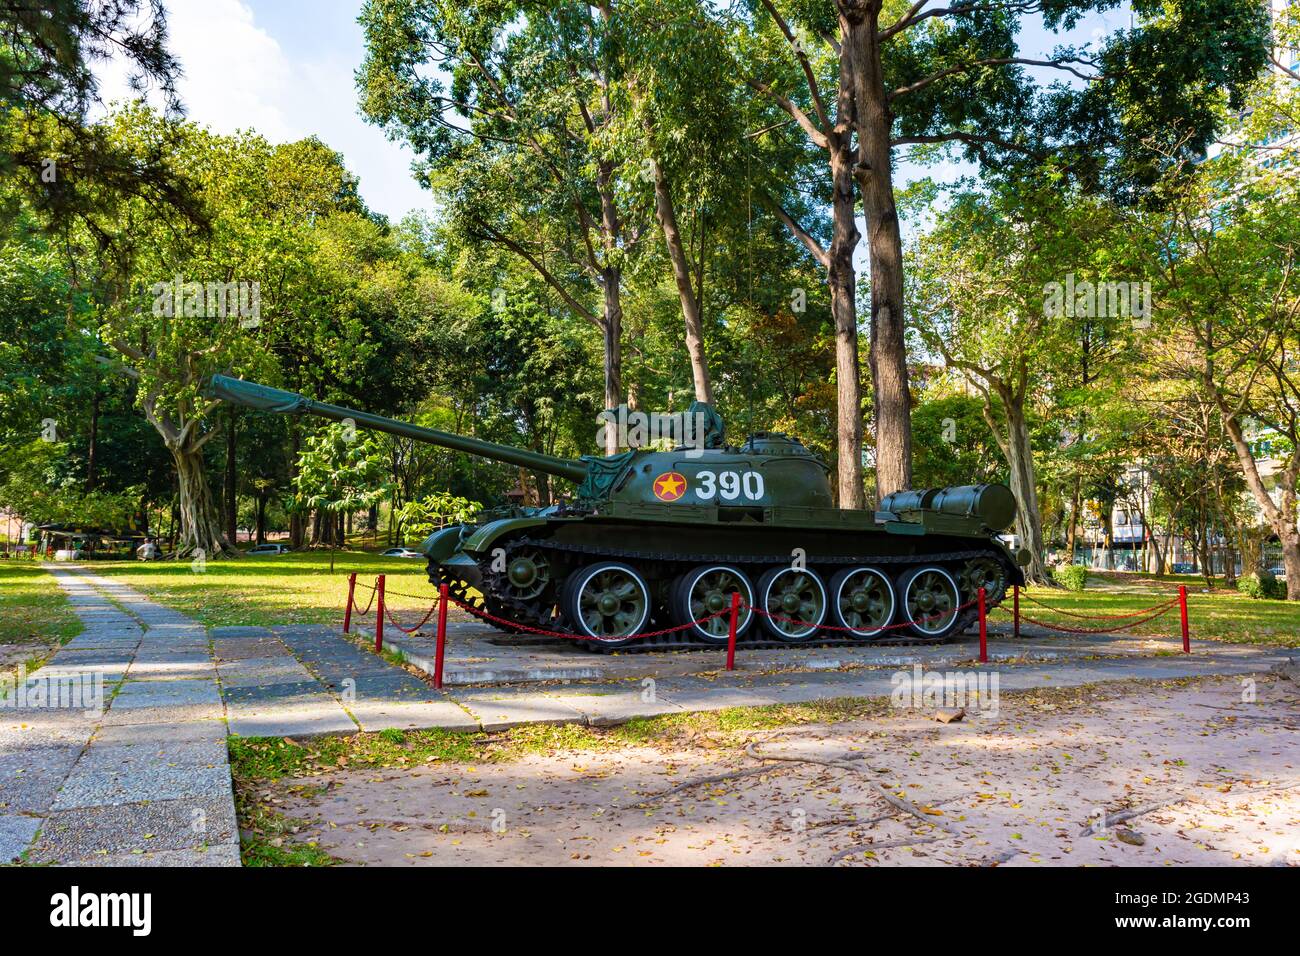 Ho Chi Minh City, Vietnam - CIRCA Jan 2020: The tank that crashed the gate in Independence Palace at 30th April 1975, ending Vietnam War. Stock Photo